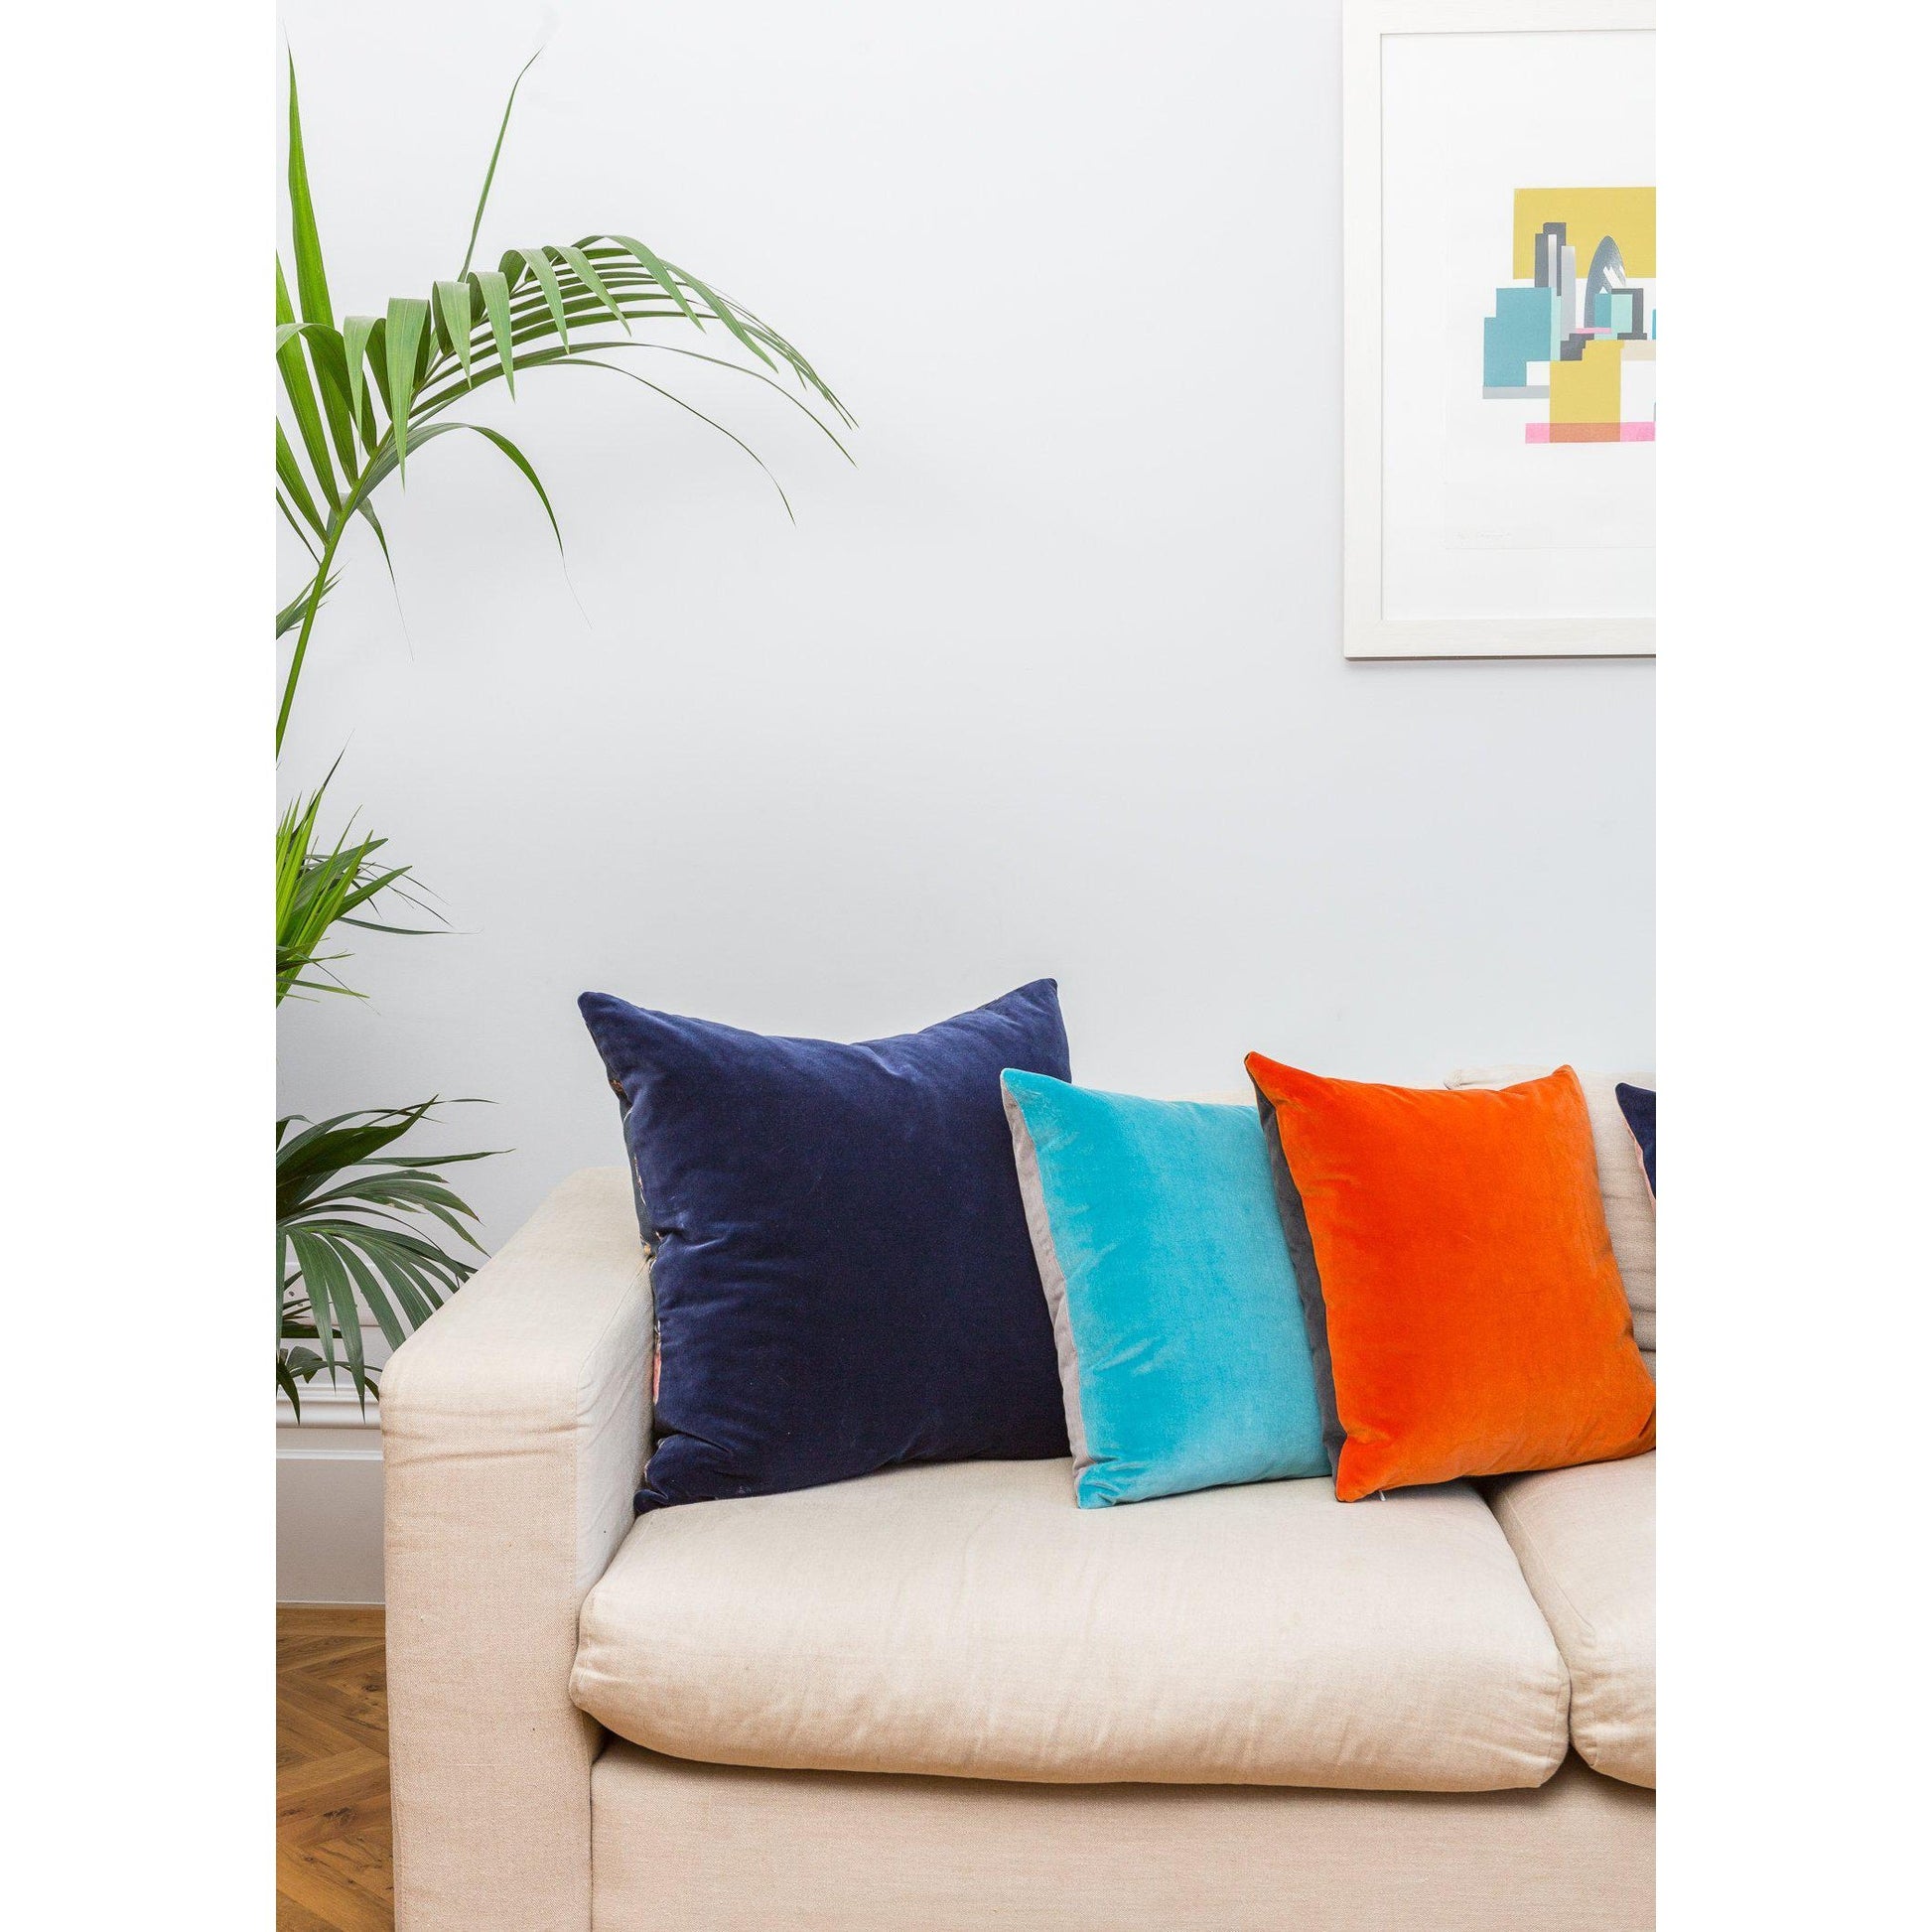 navy cushion cover with turquoise and orange cushions on a linen sofa